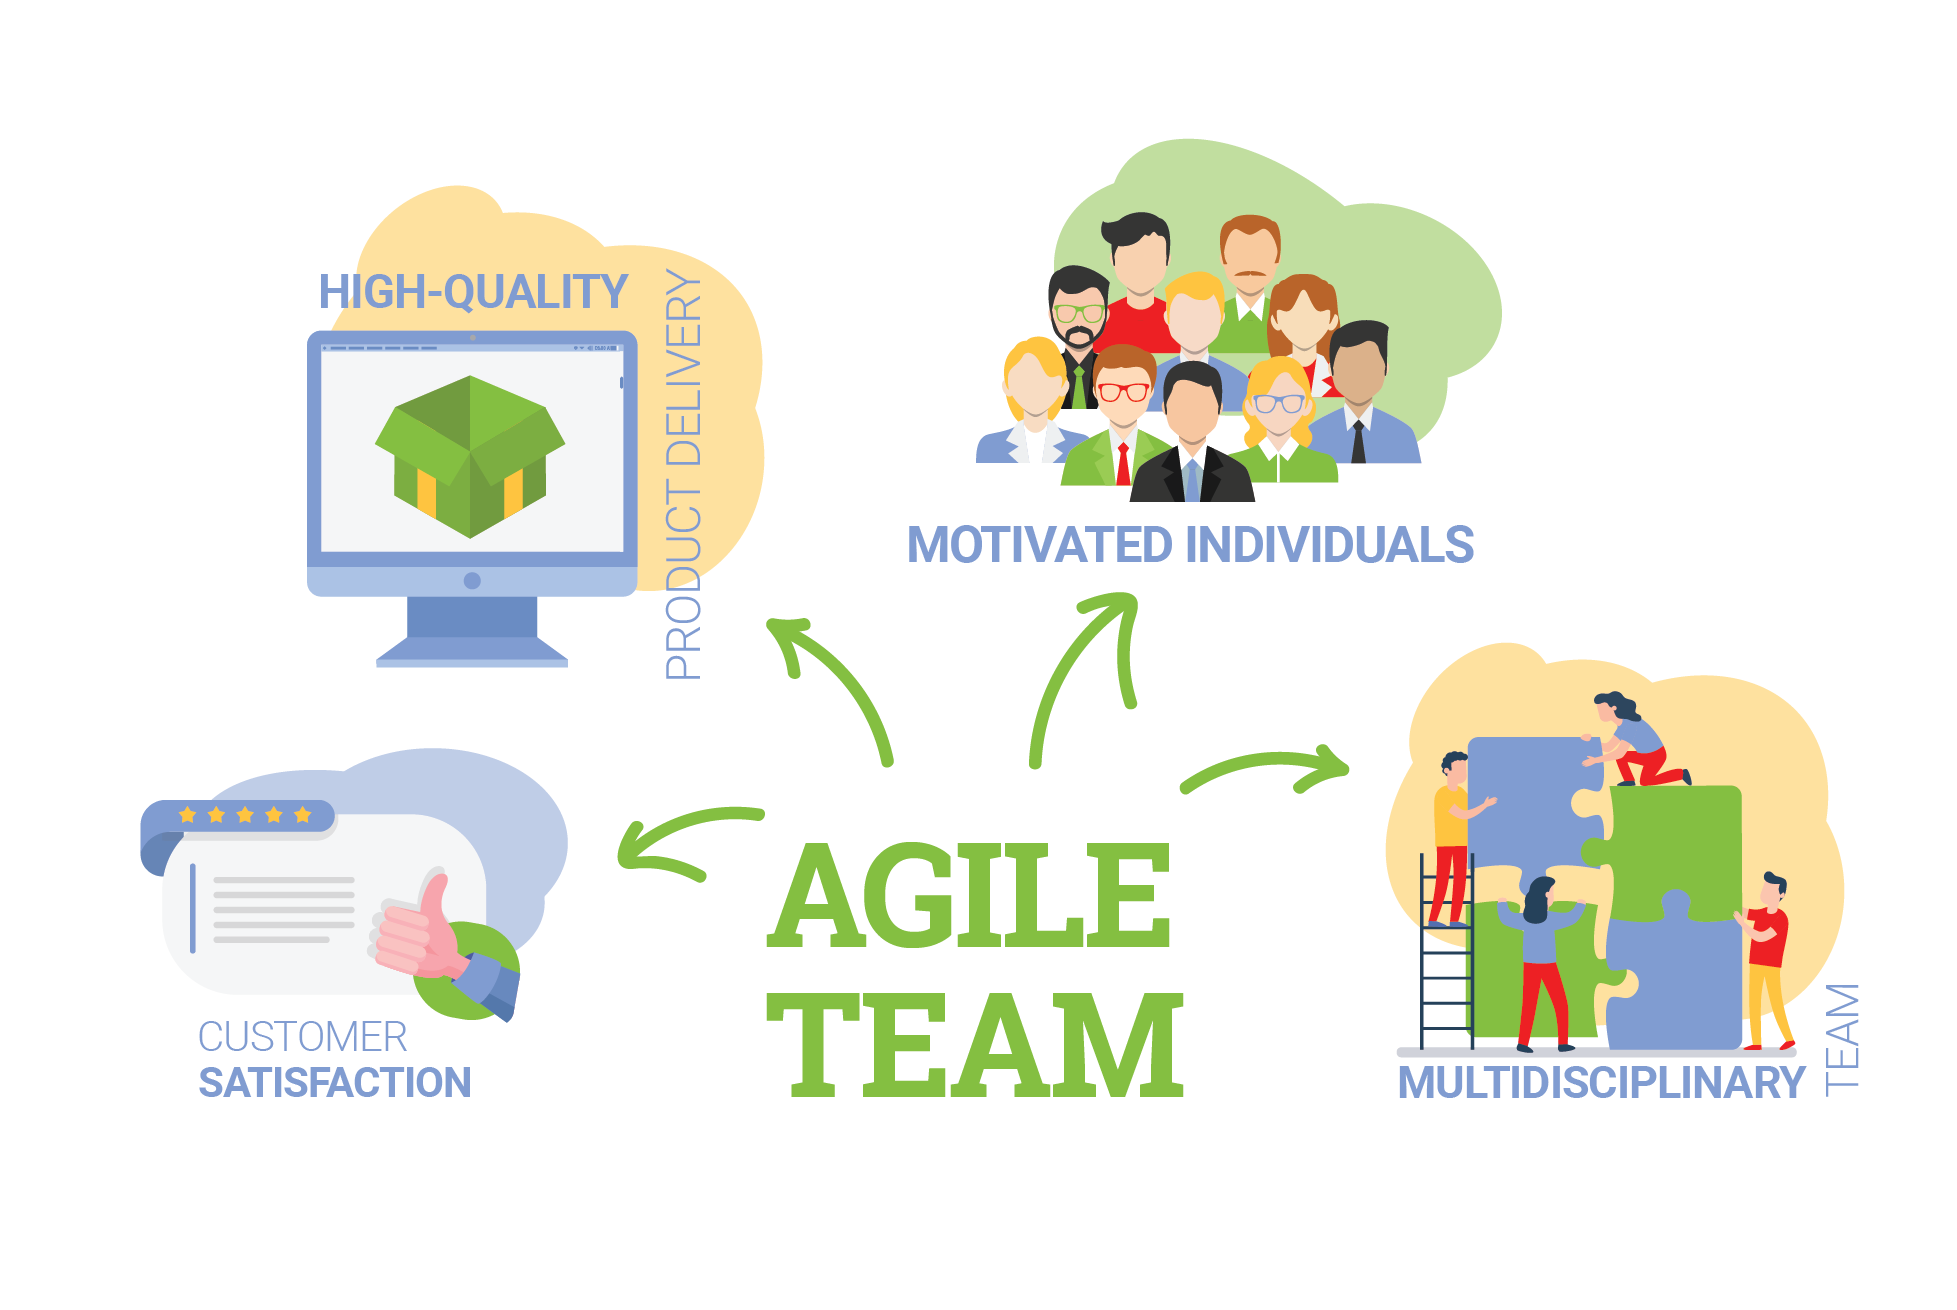 Agile Teams and their components